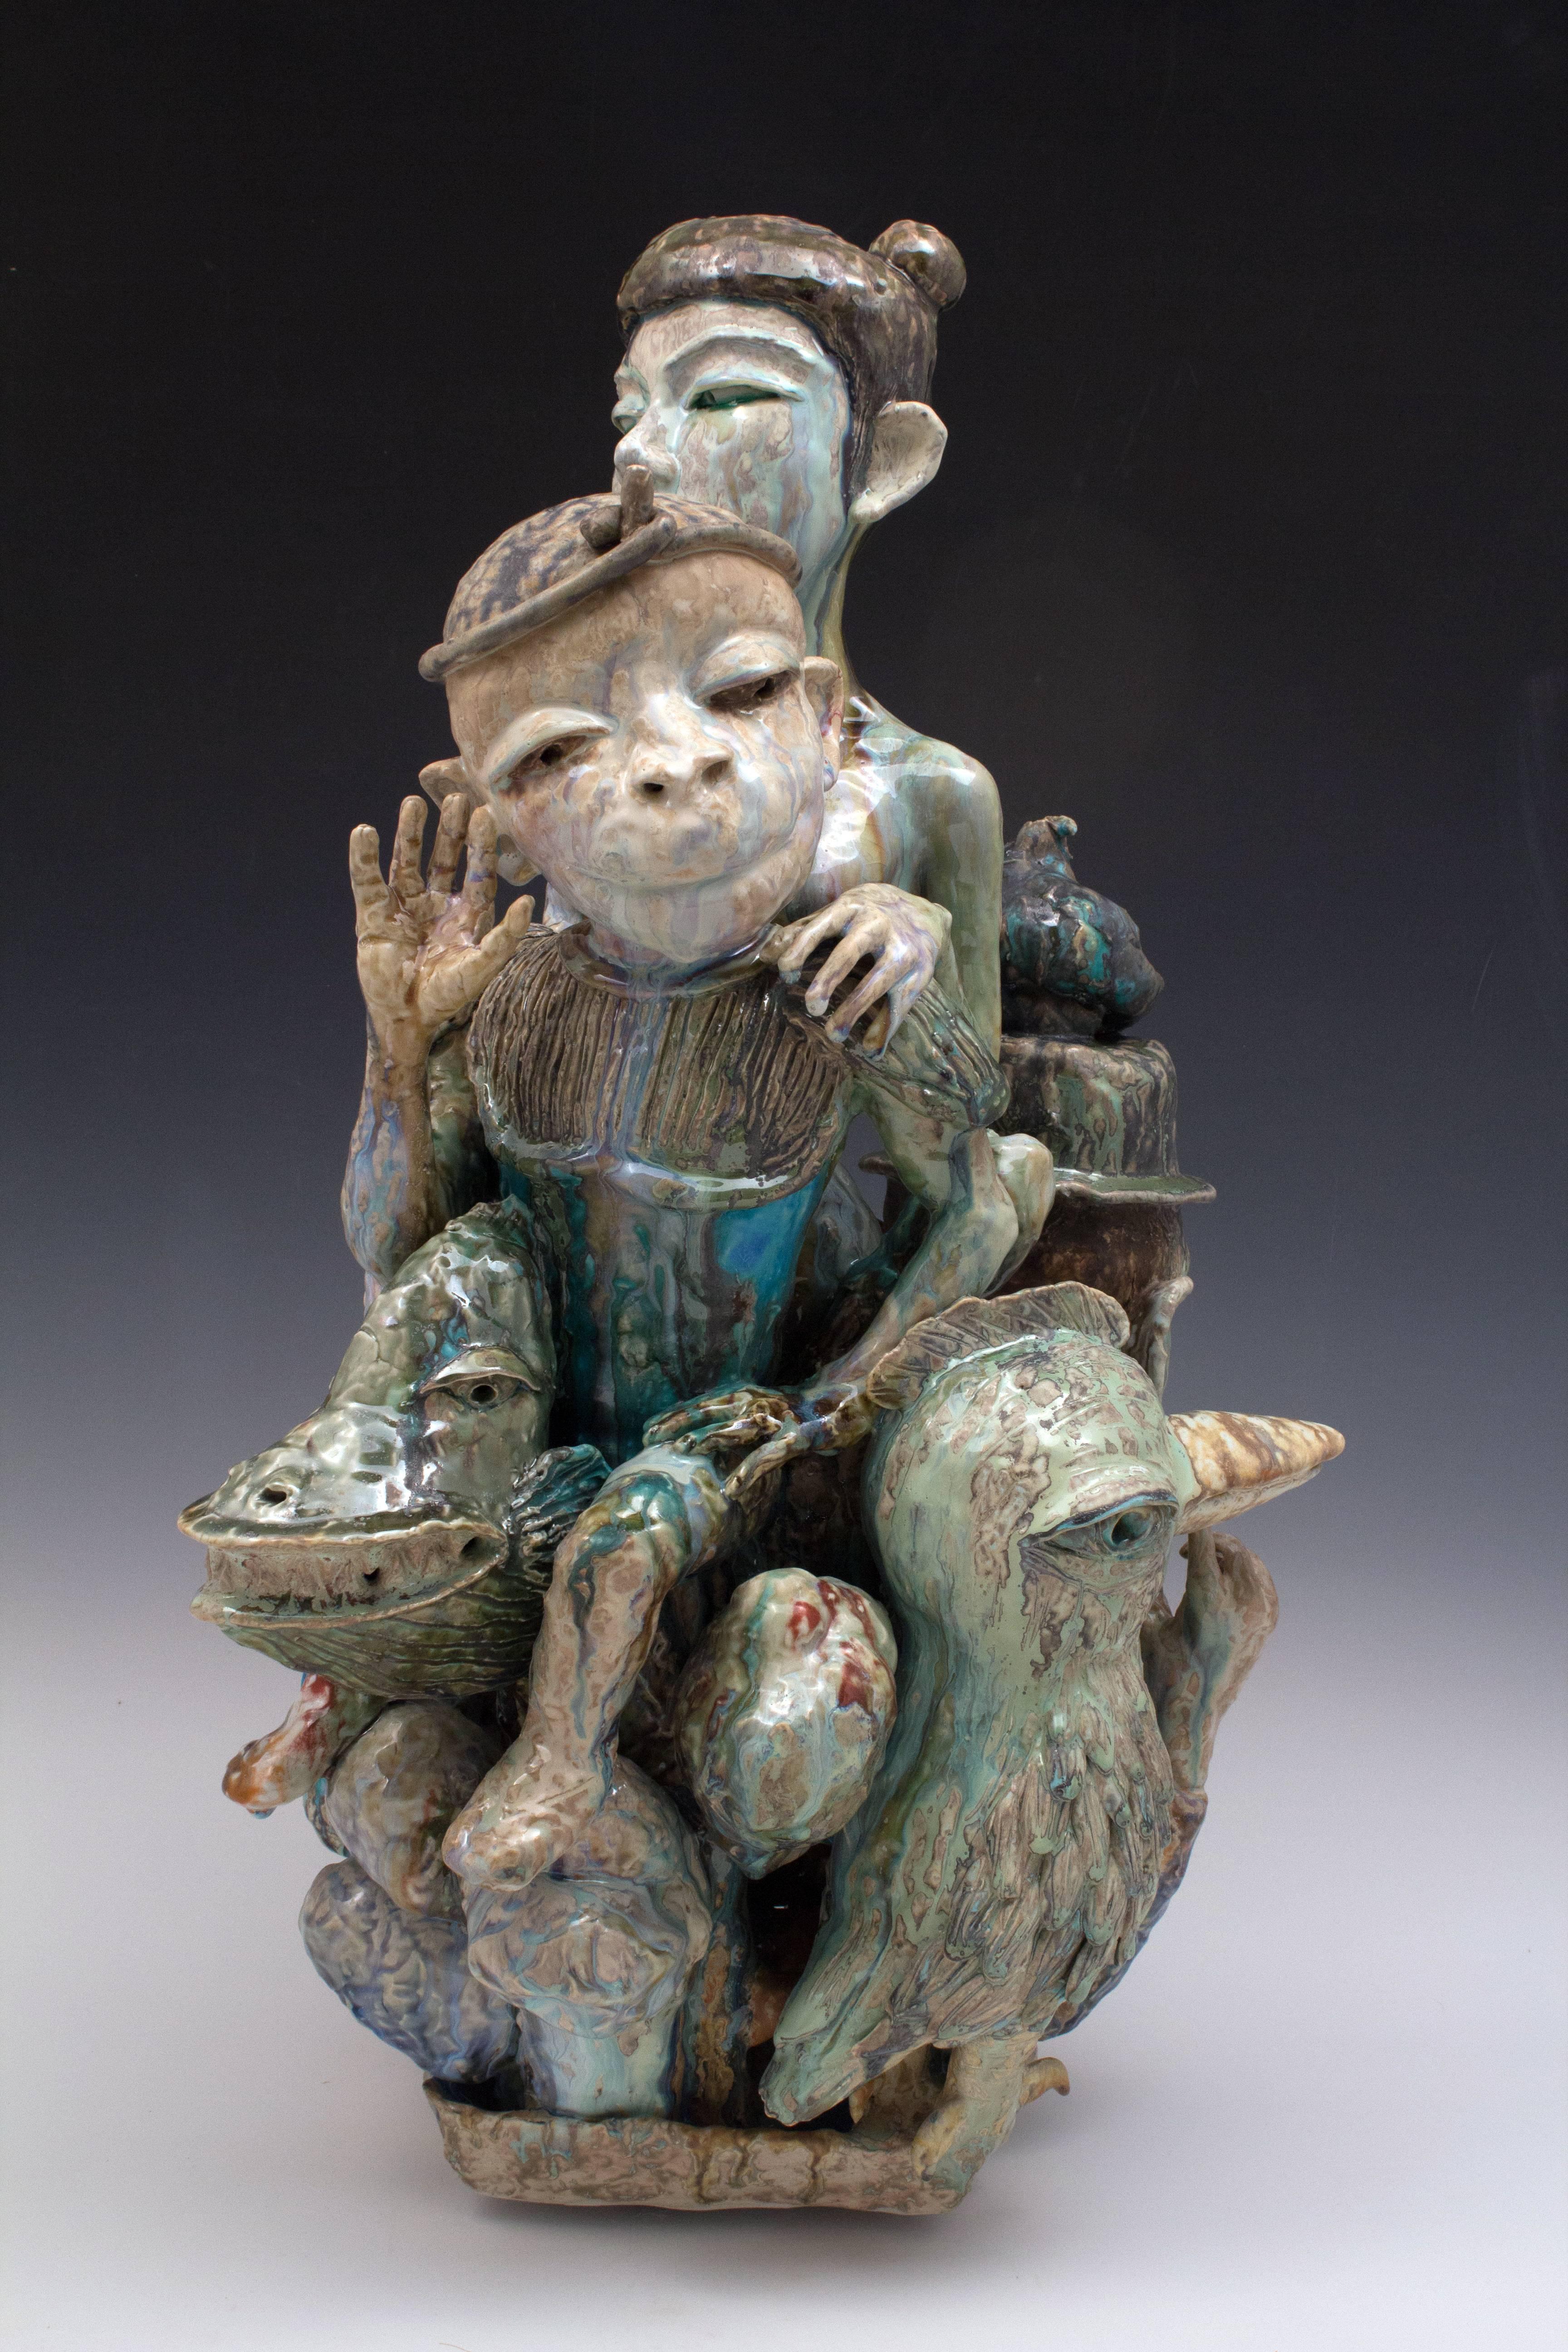 SunKoo Yuh Figurative Sculpture - "Year of the Monkey", Figurative Porcelain Sculpture with Colorful Glaze